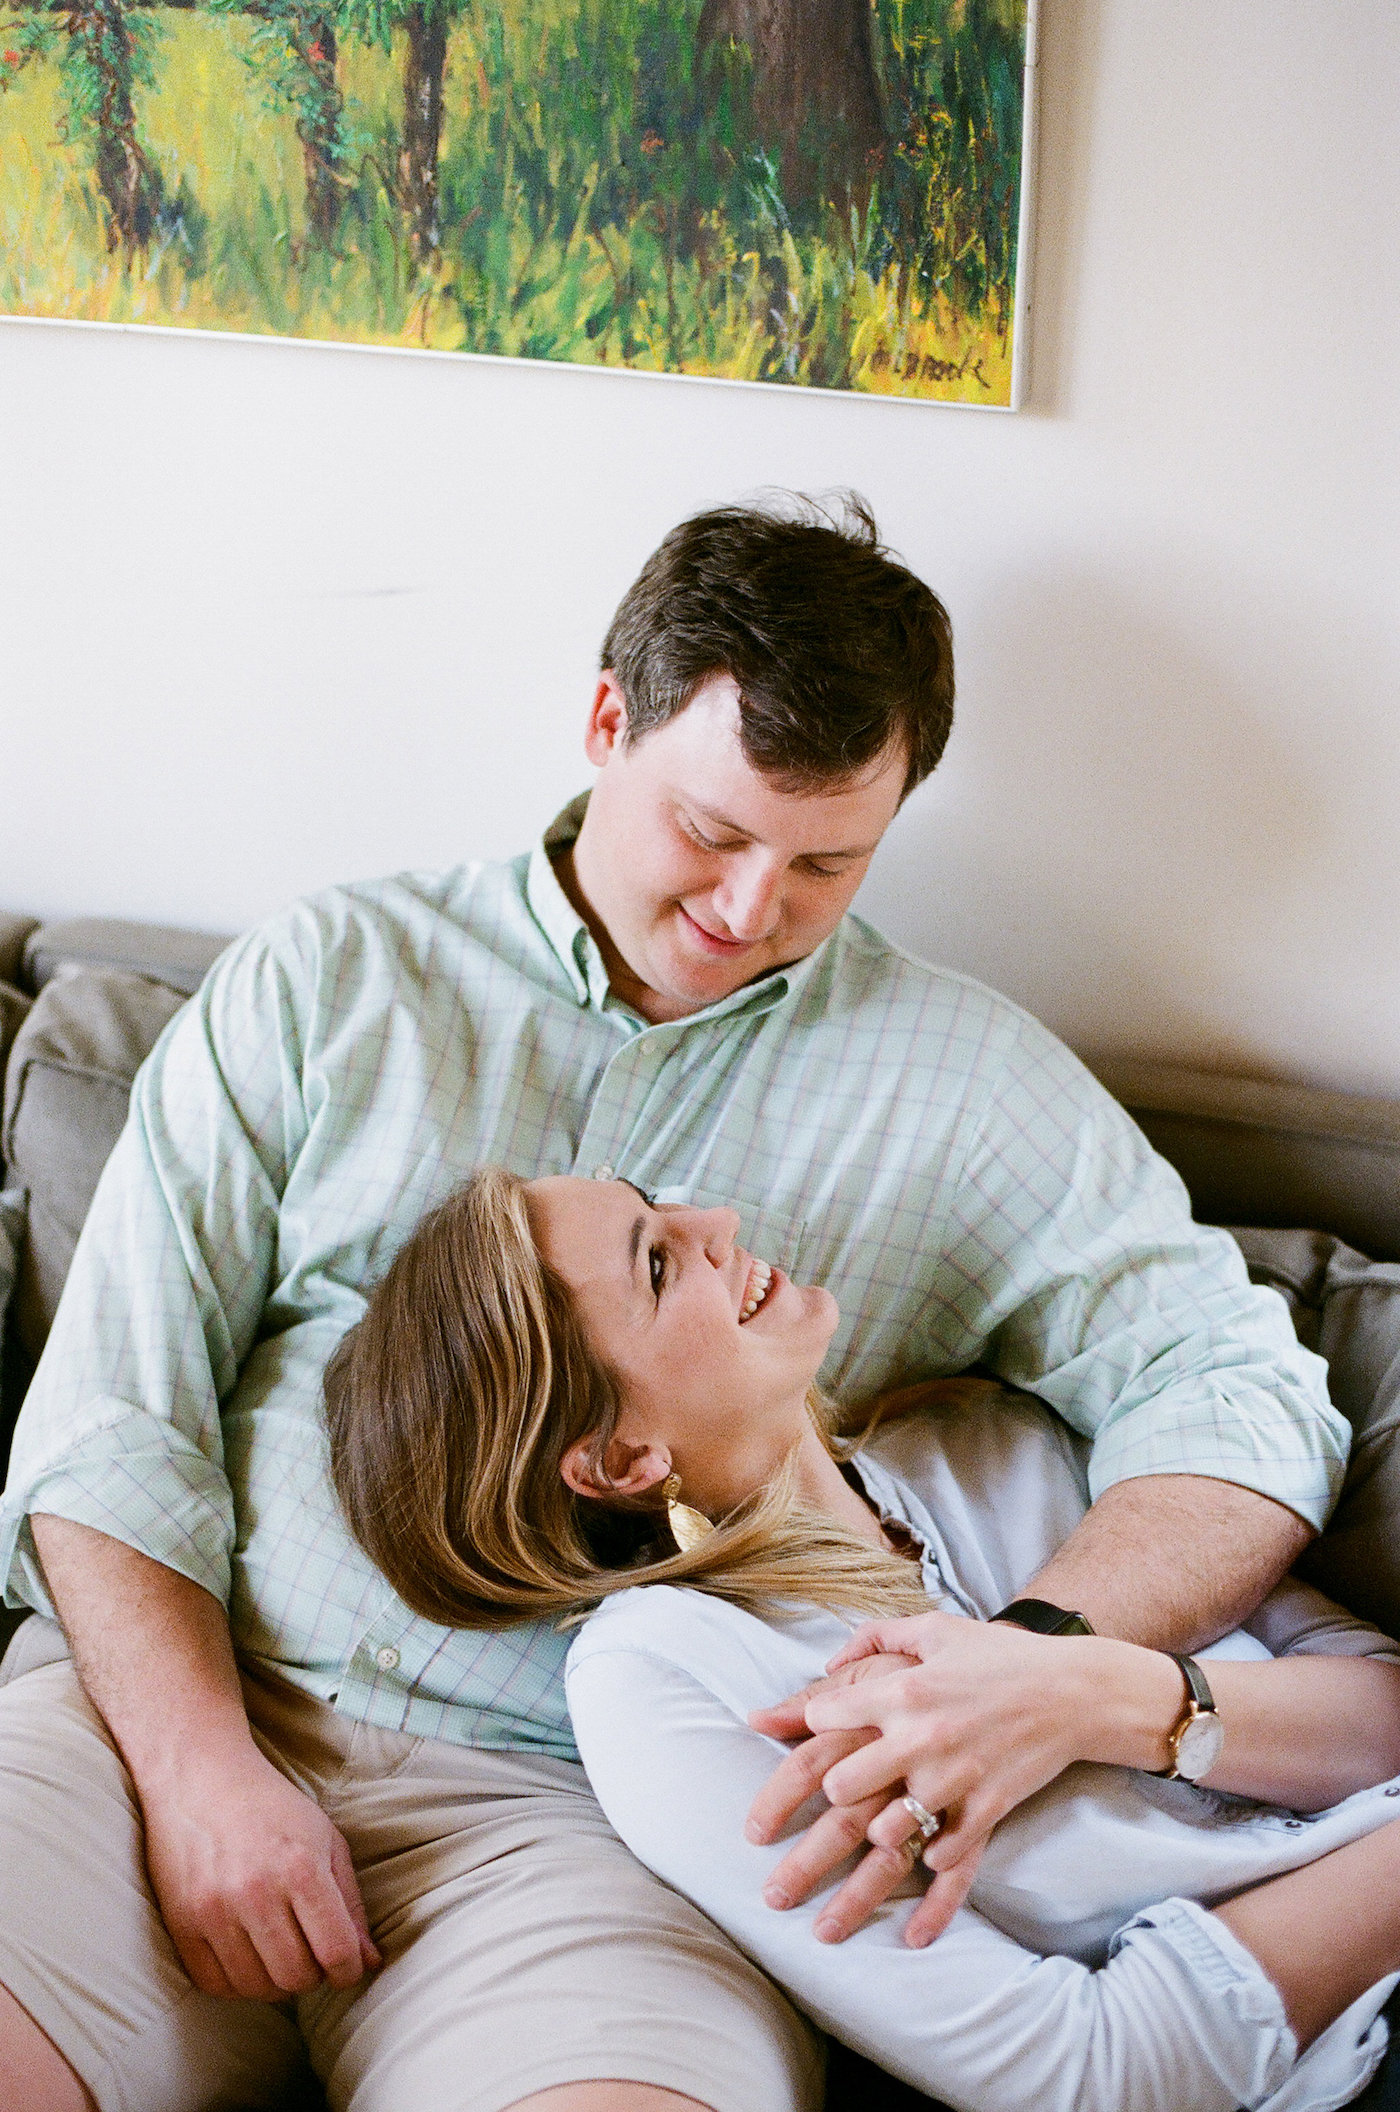 Family Lifestyle Photo Shoot with Hannah Groat // www.thehiveblog.com // #family #lifestyle #photography